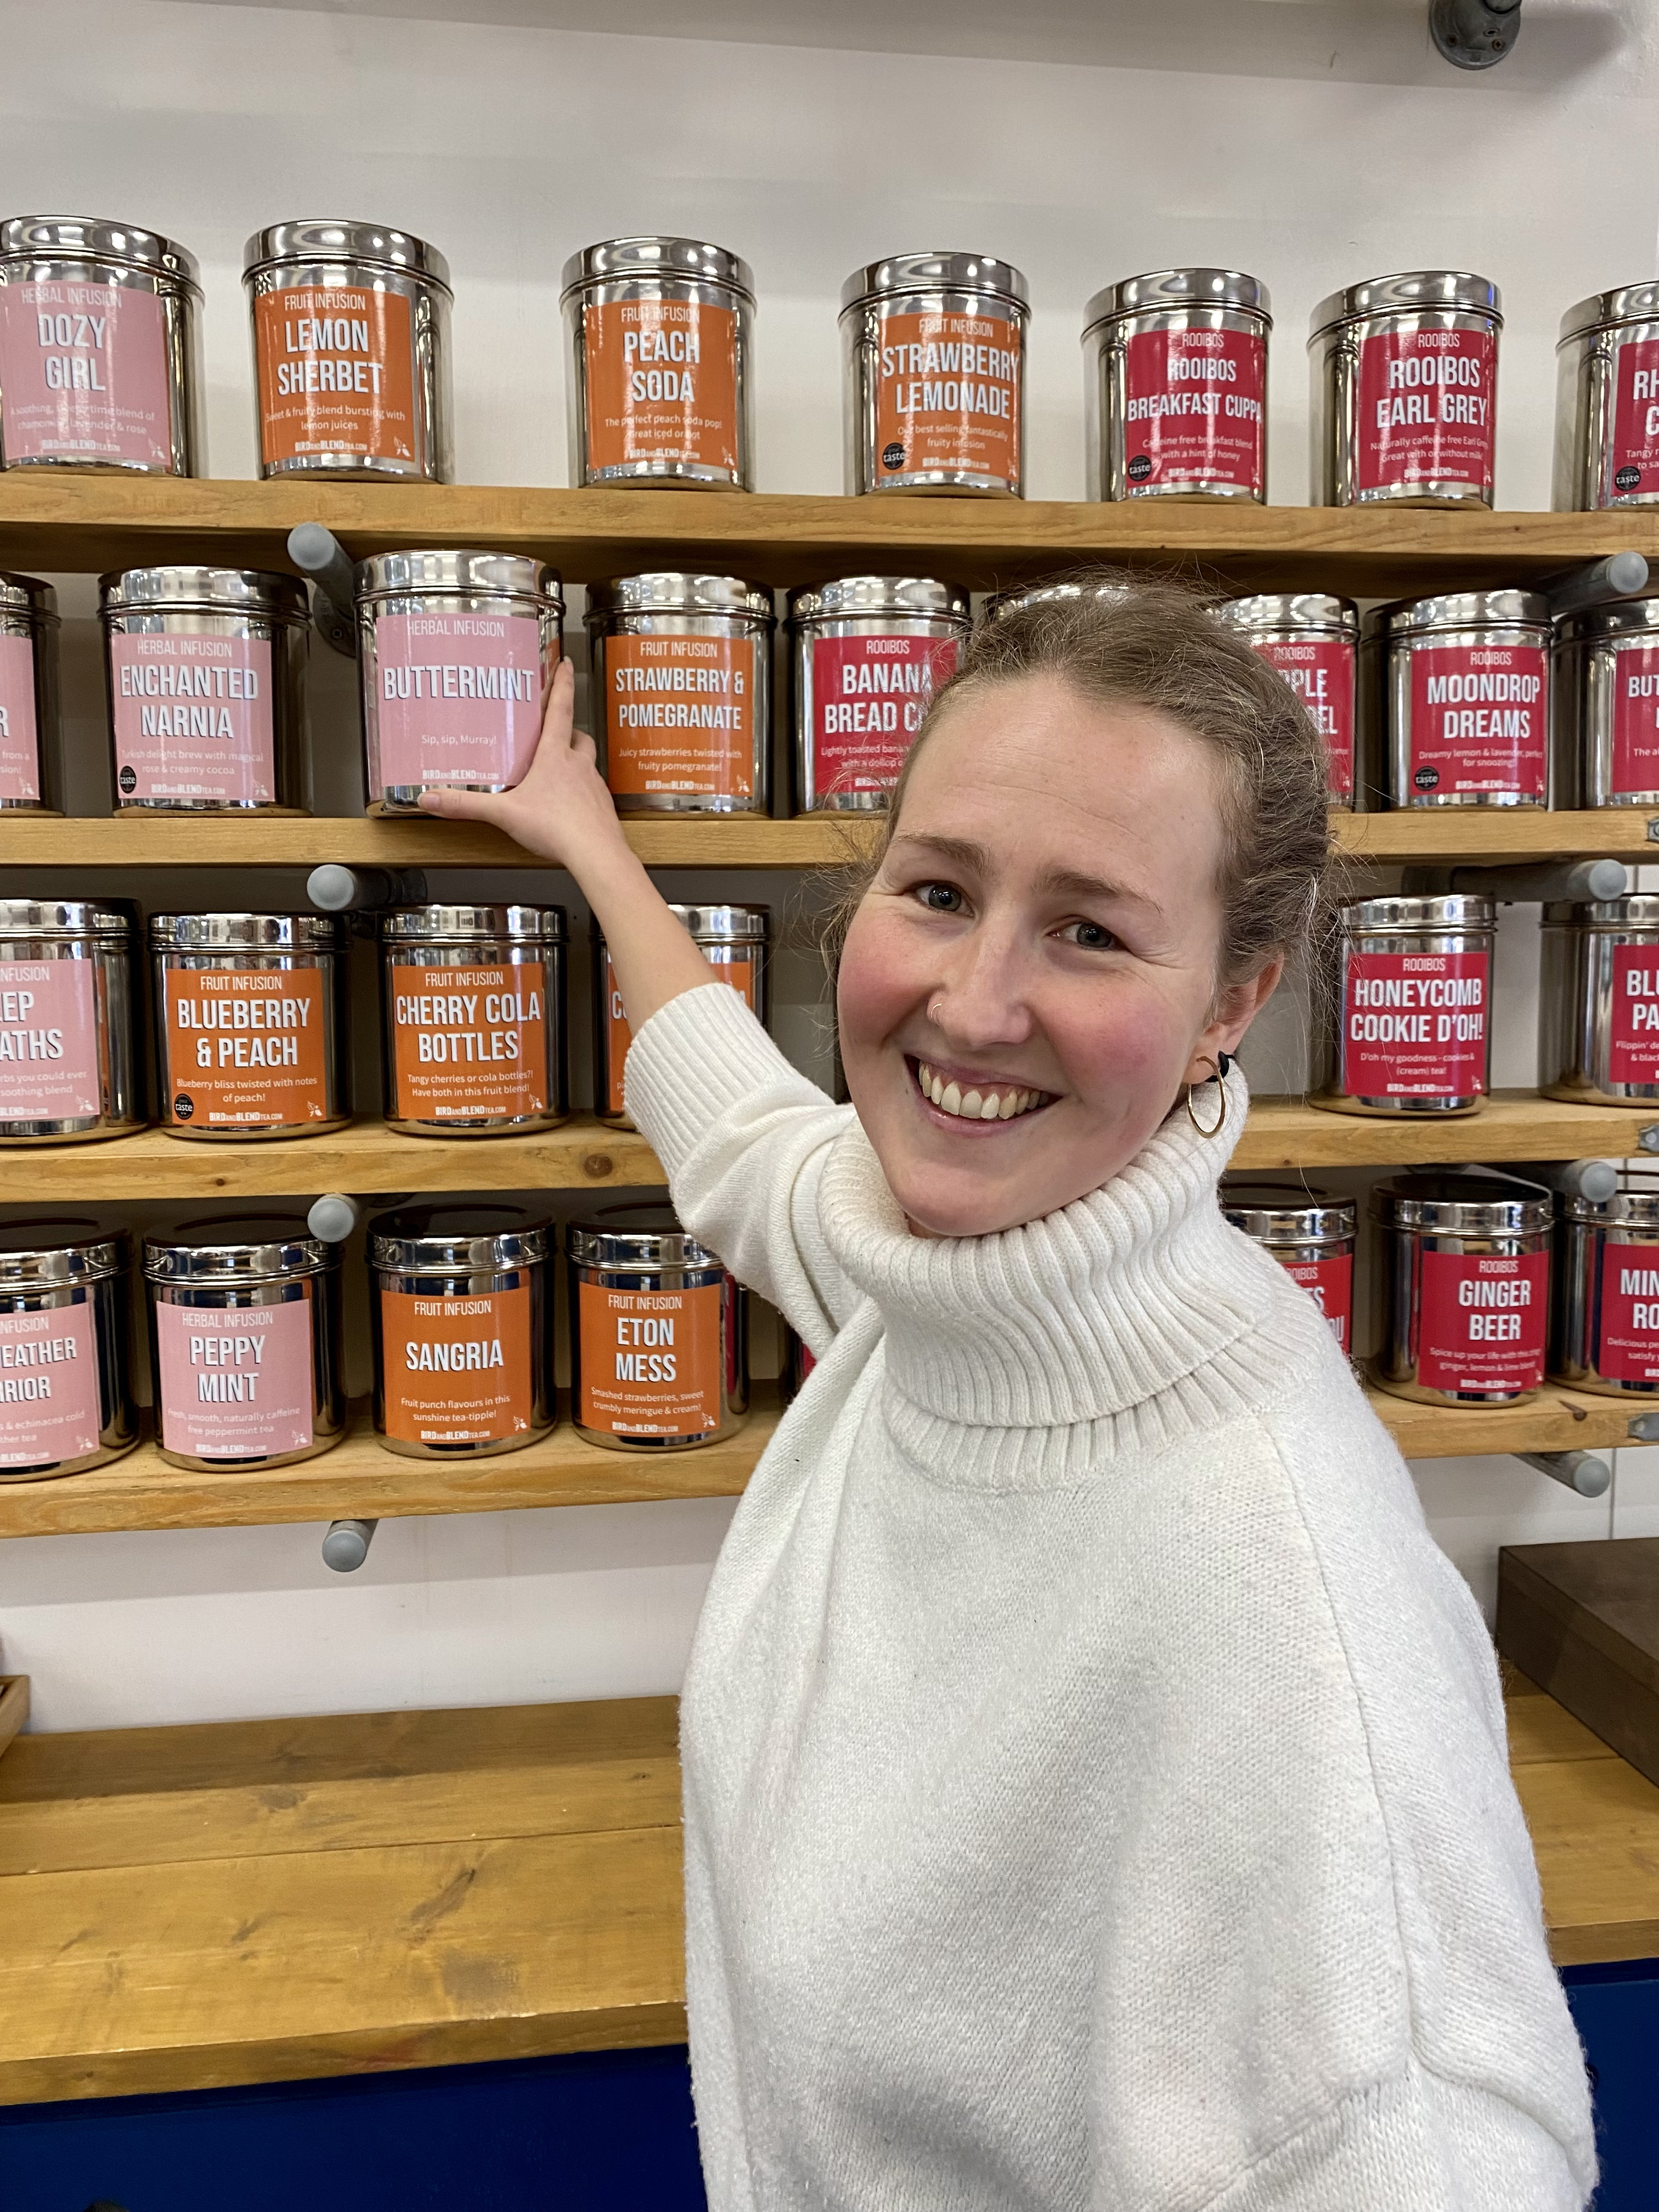 Image of women smiling in a white turtle neck jumper, hair tied up and wearing gold hooped earrings - reaching for a tin of tea on wooden shelves full of tins